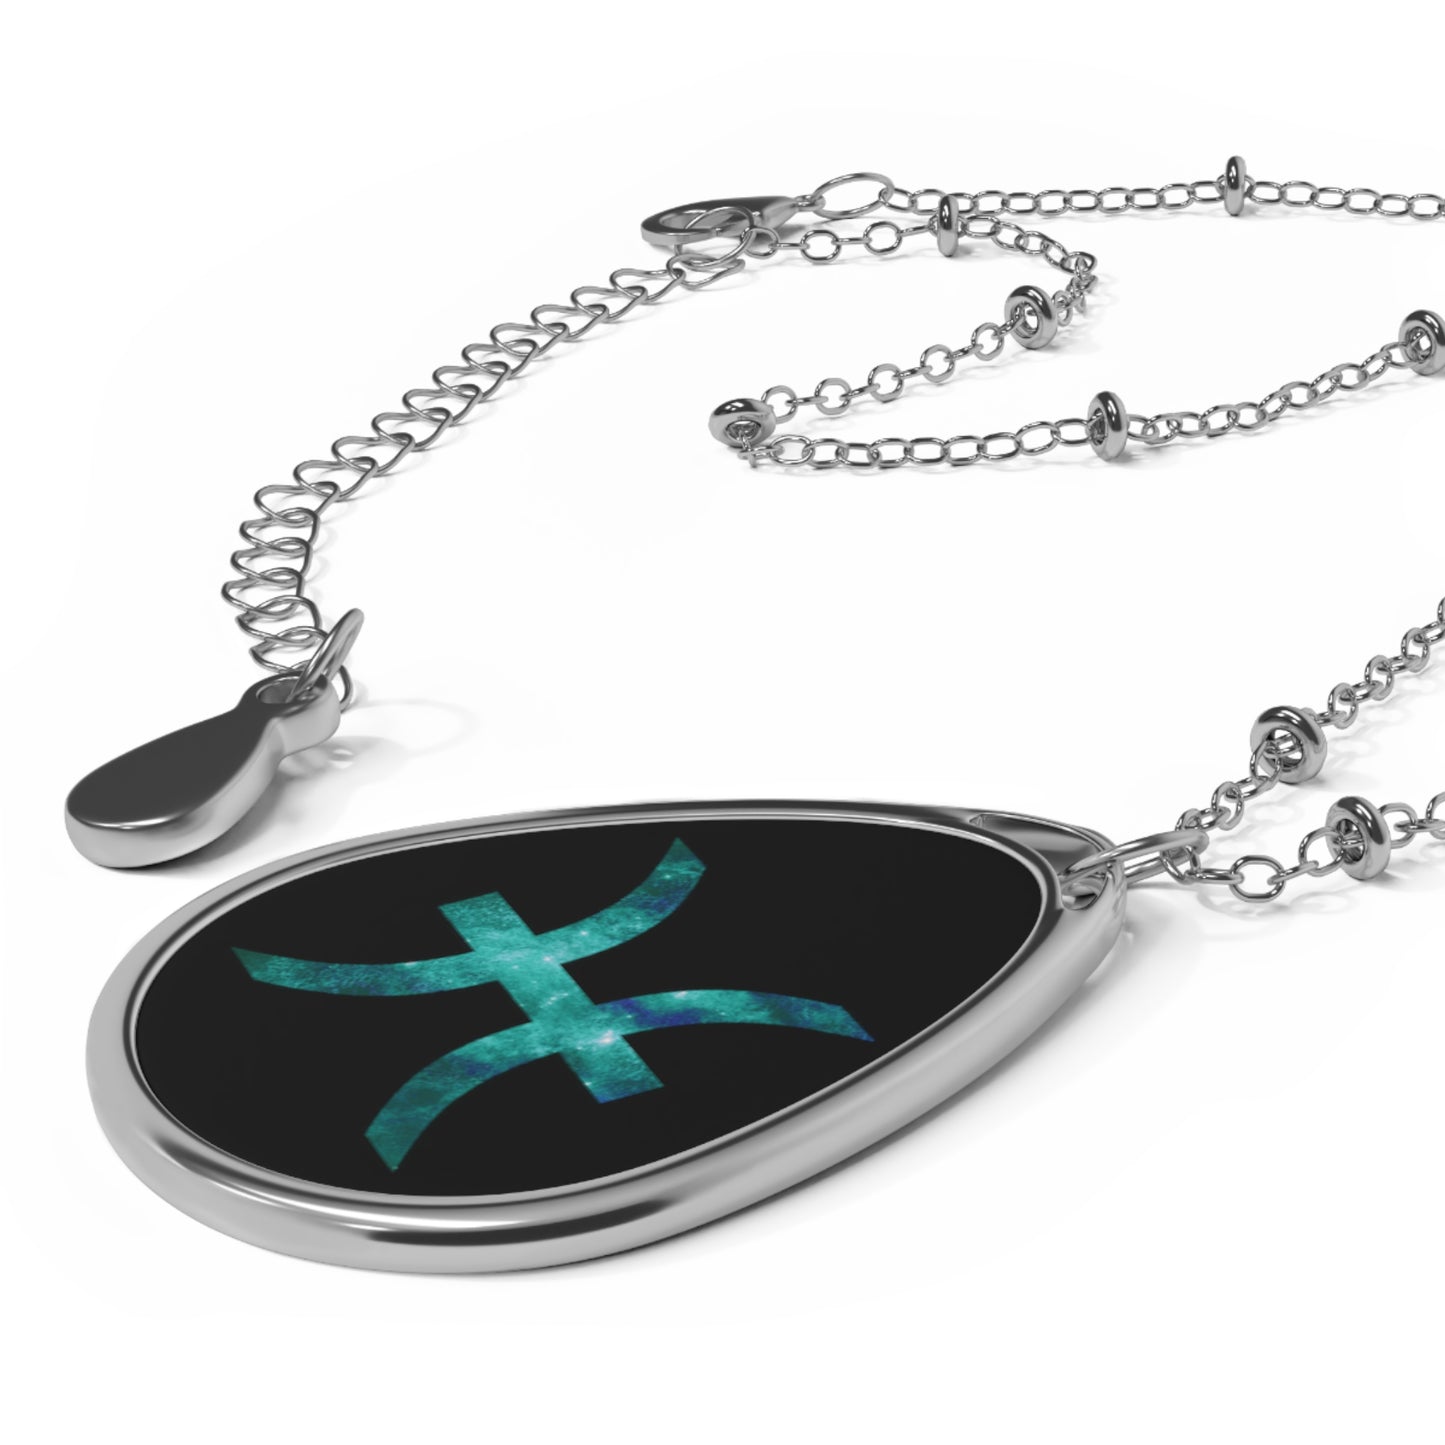 Pisces Zodiac Sign ~ Necklace & Oval Pendant With Chain